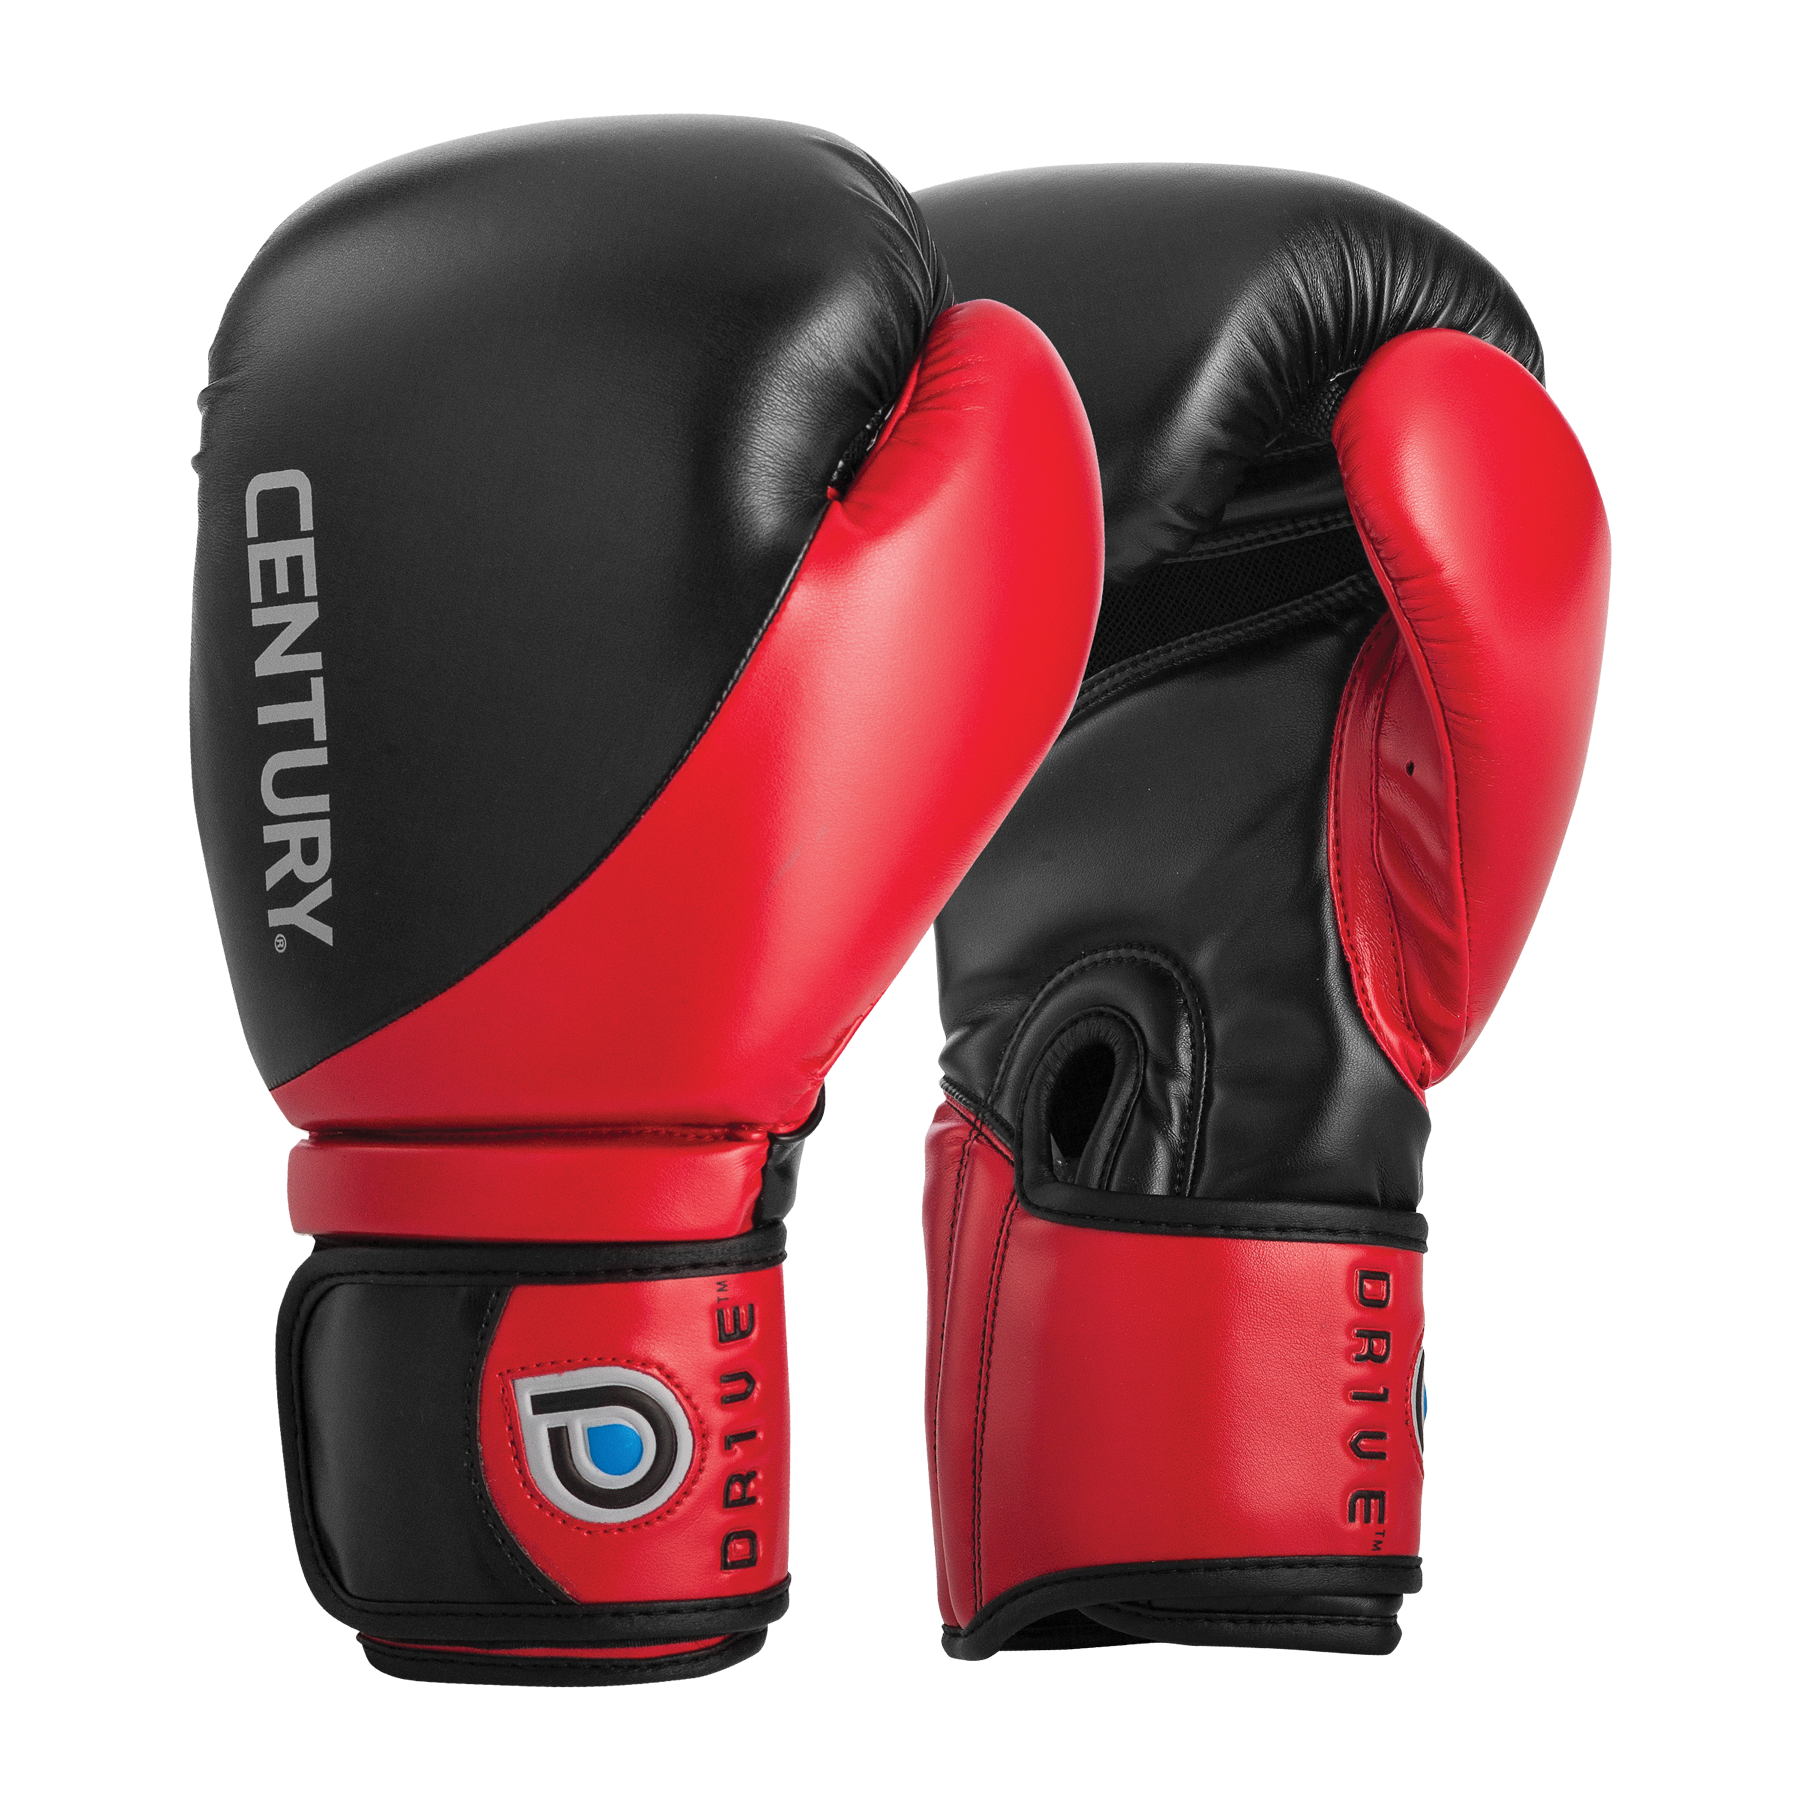 Drive Boxing Gloves Red/Black